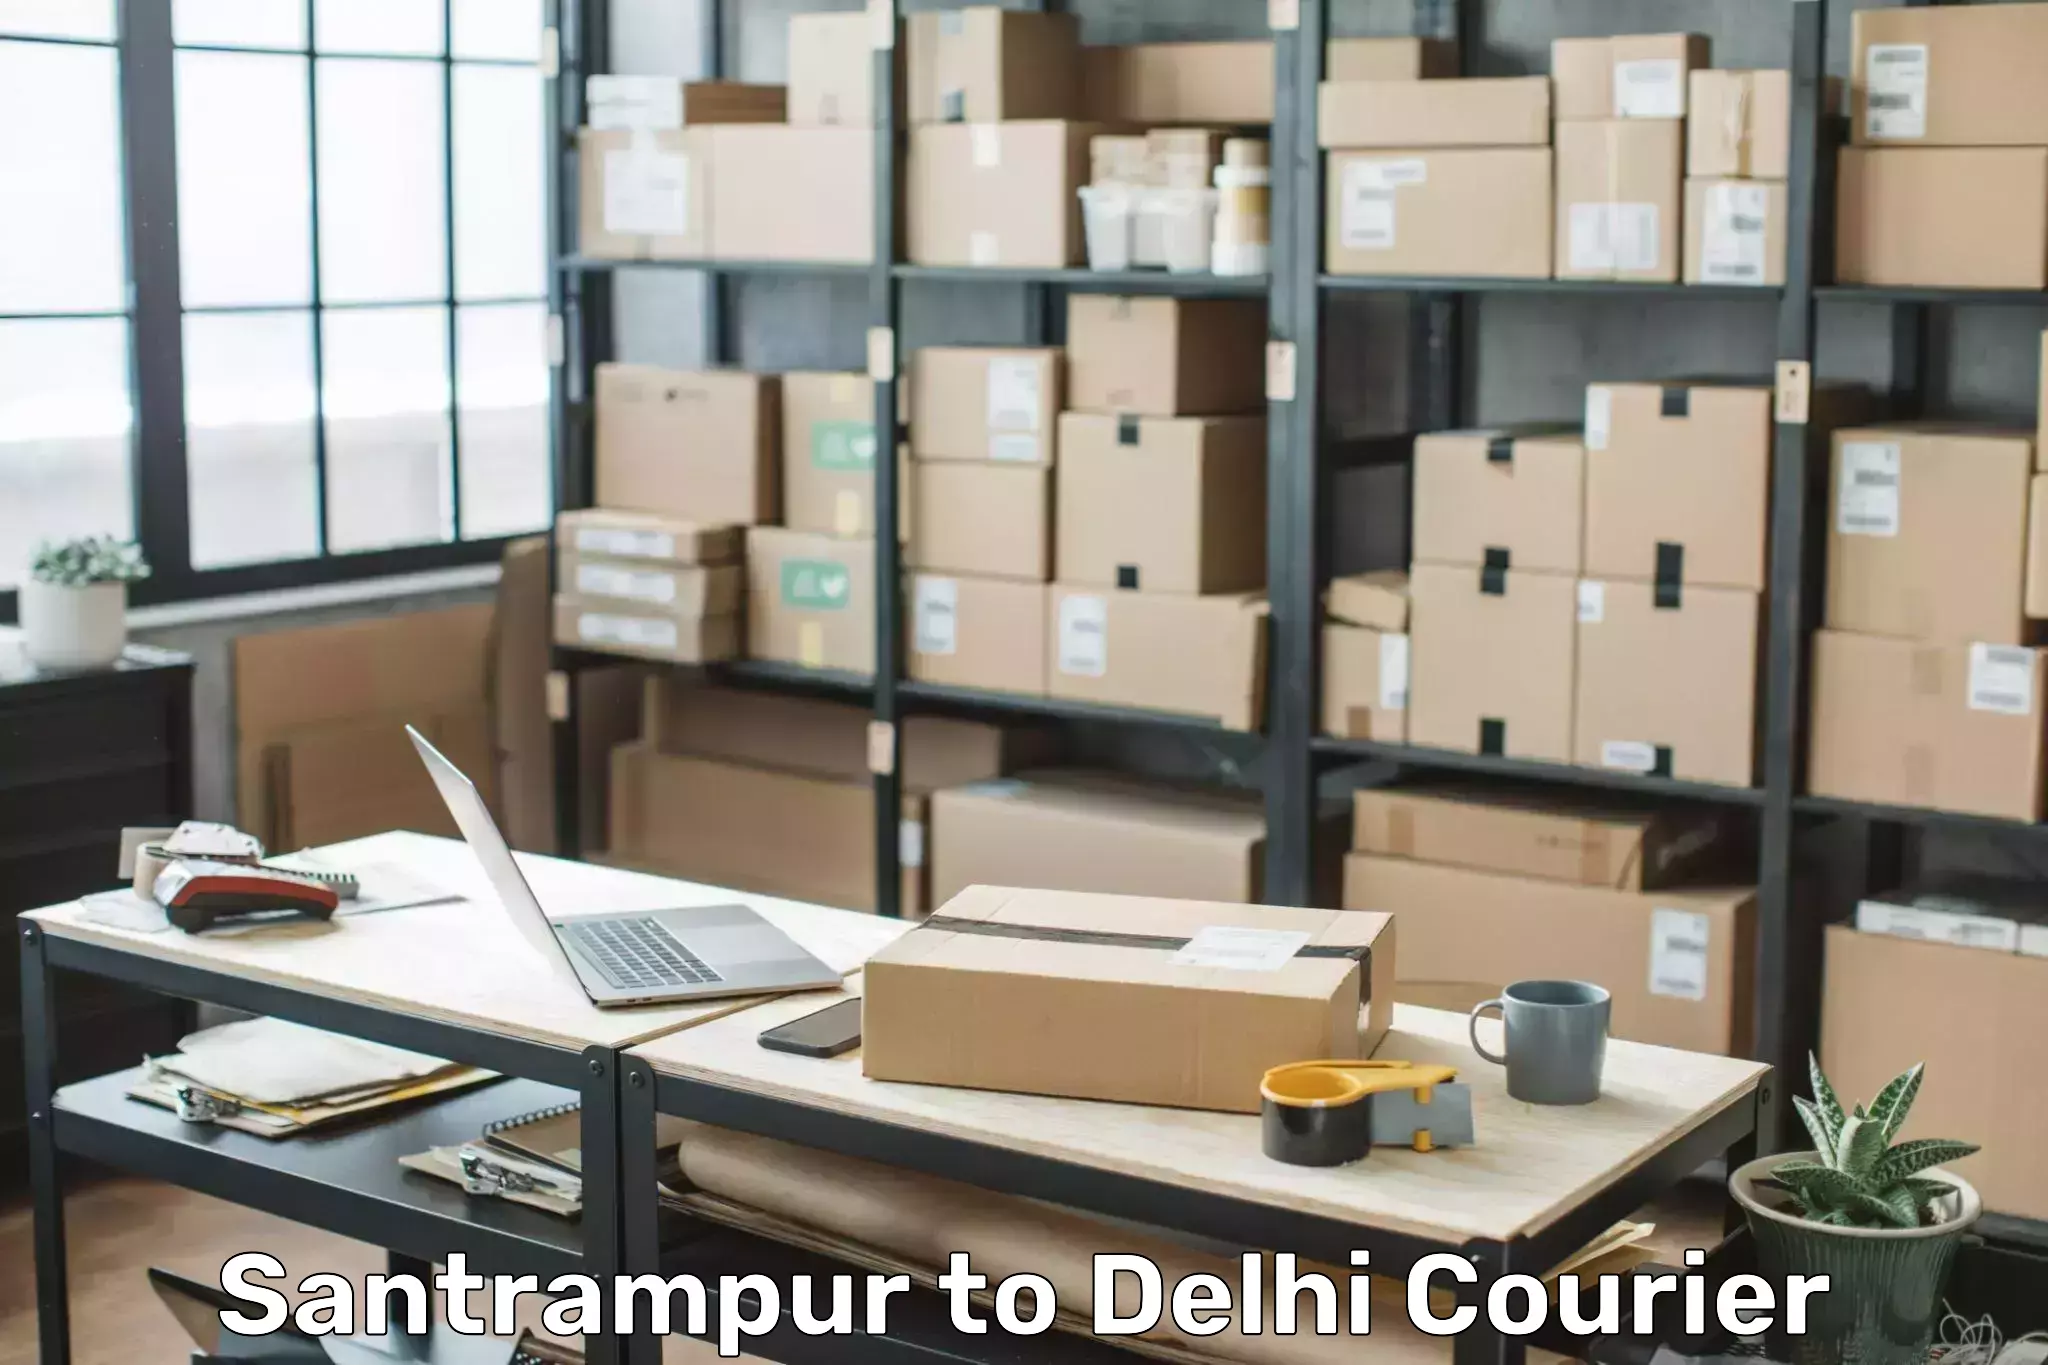 Online luggage shipping booking Santrampur to Delhi